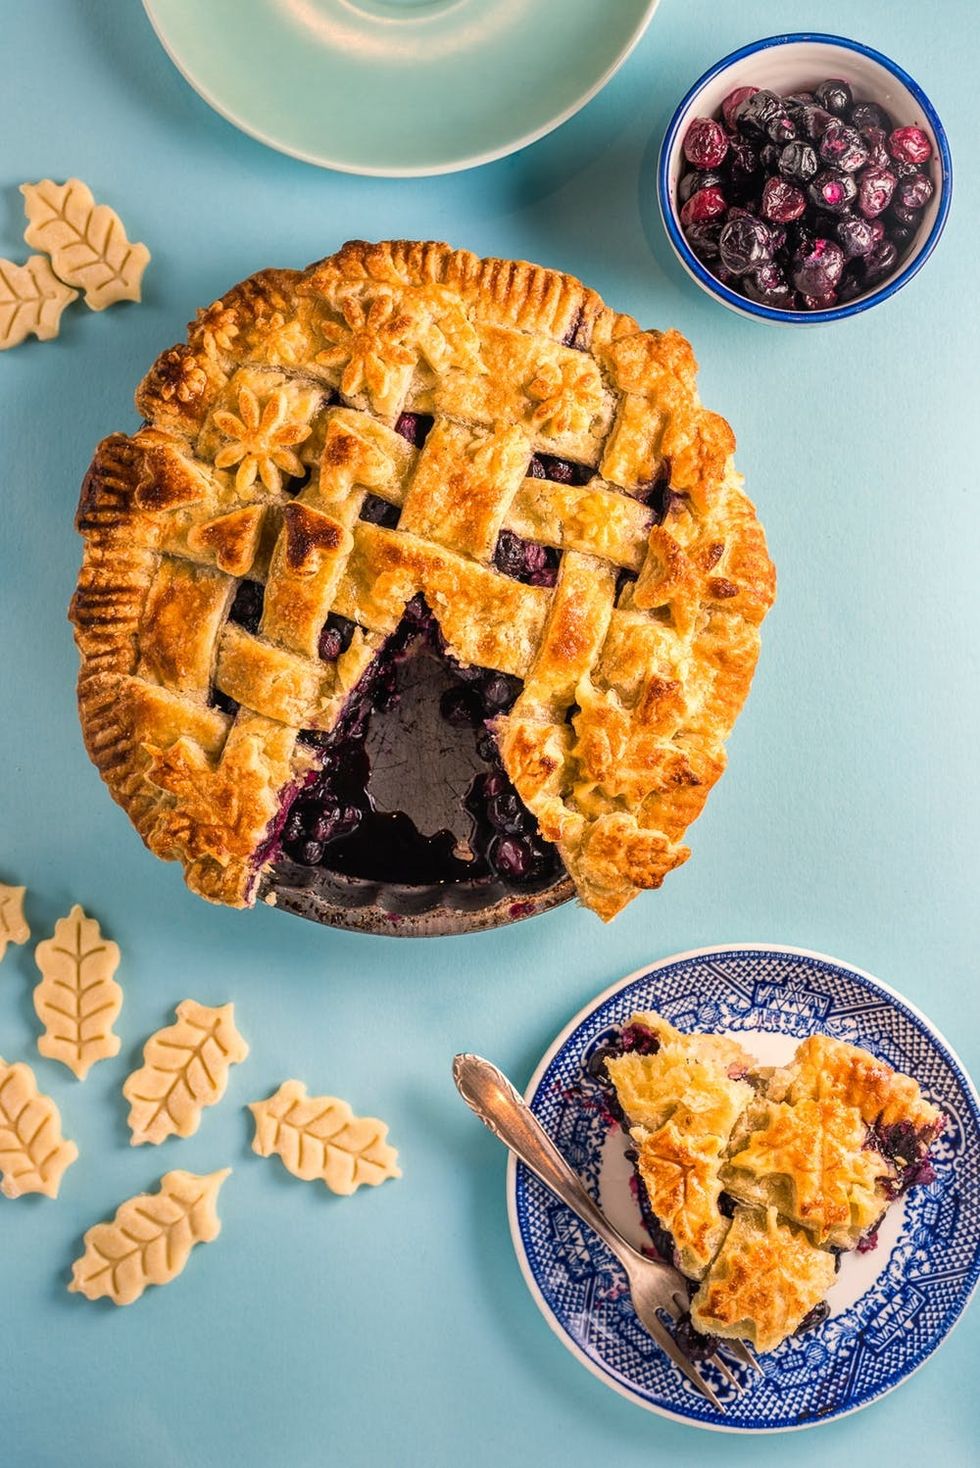 Celebrate Pie Day with this classic blueberry pie